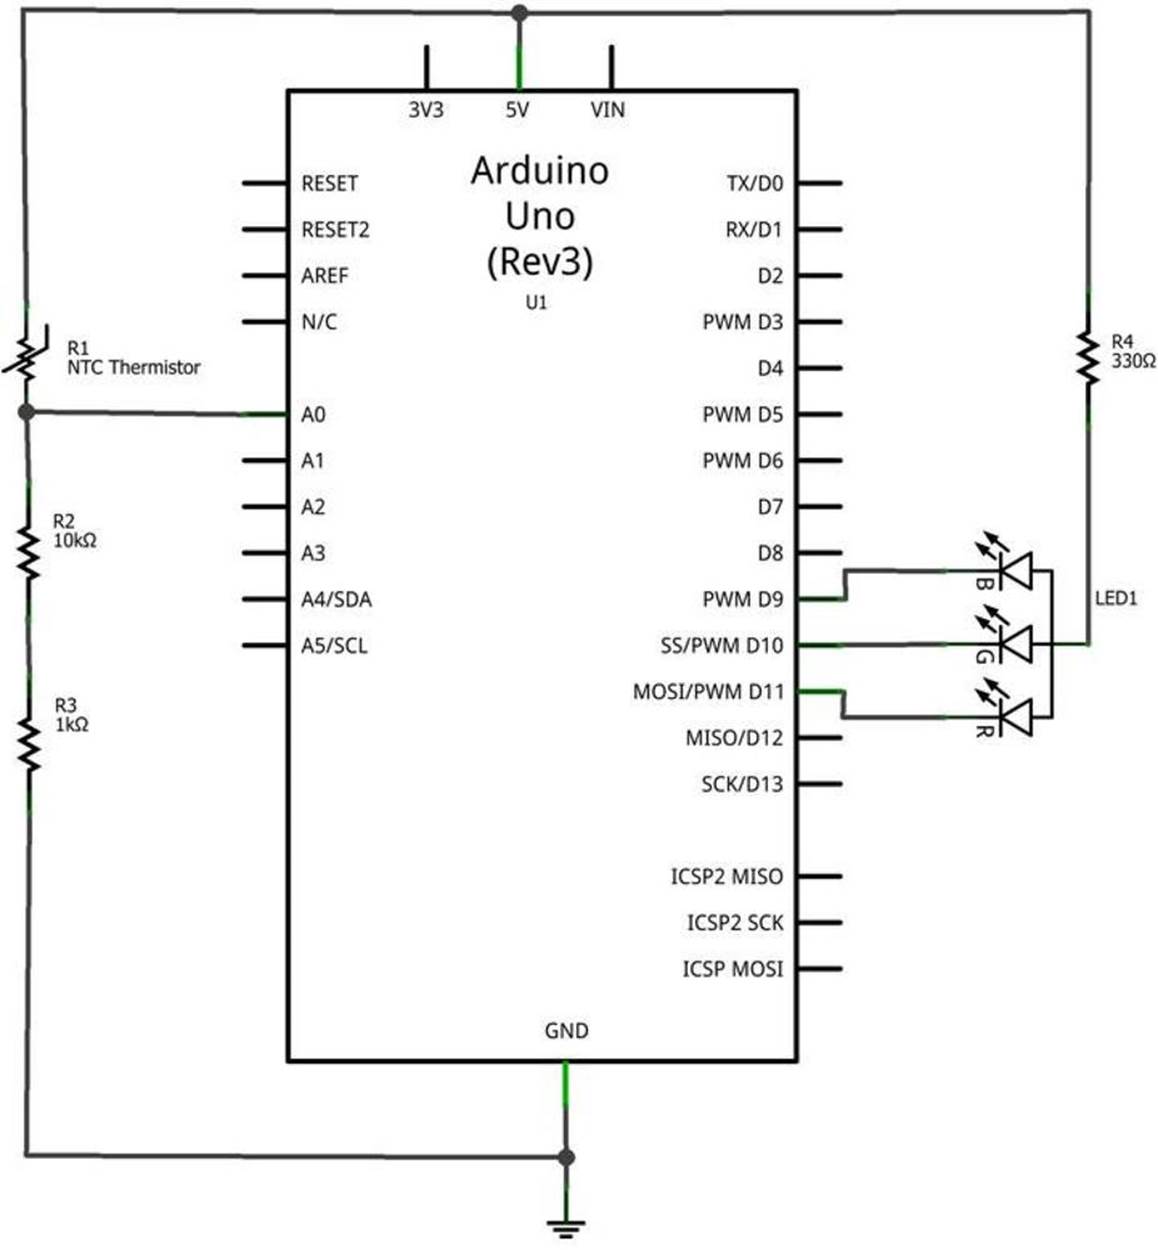 The Pocket Stage Light Fritzing circuit schematic diagram